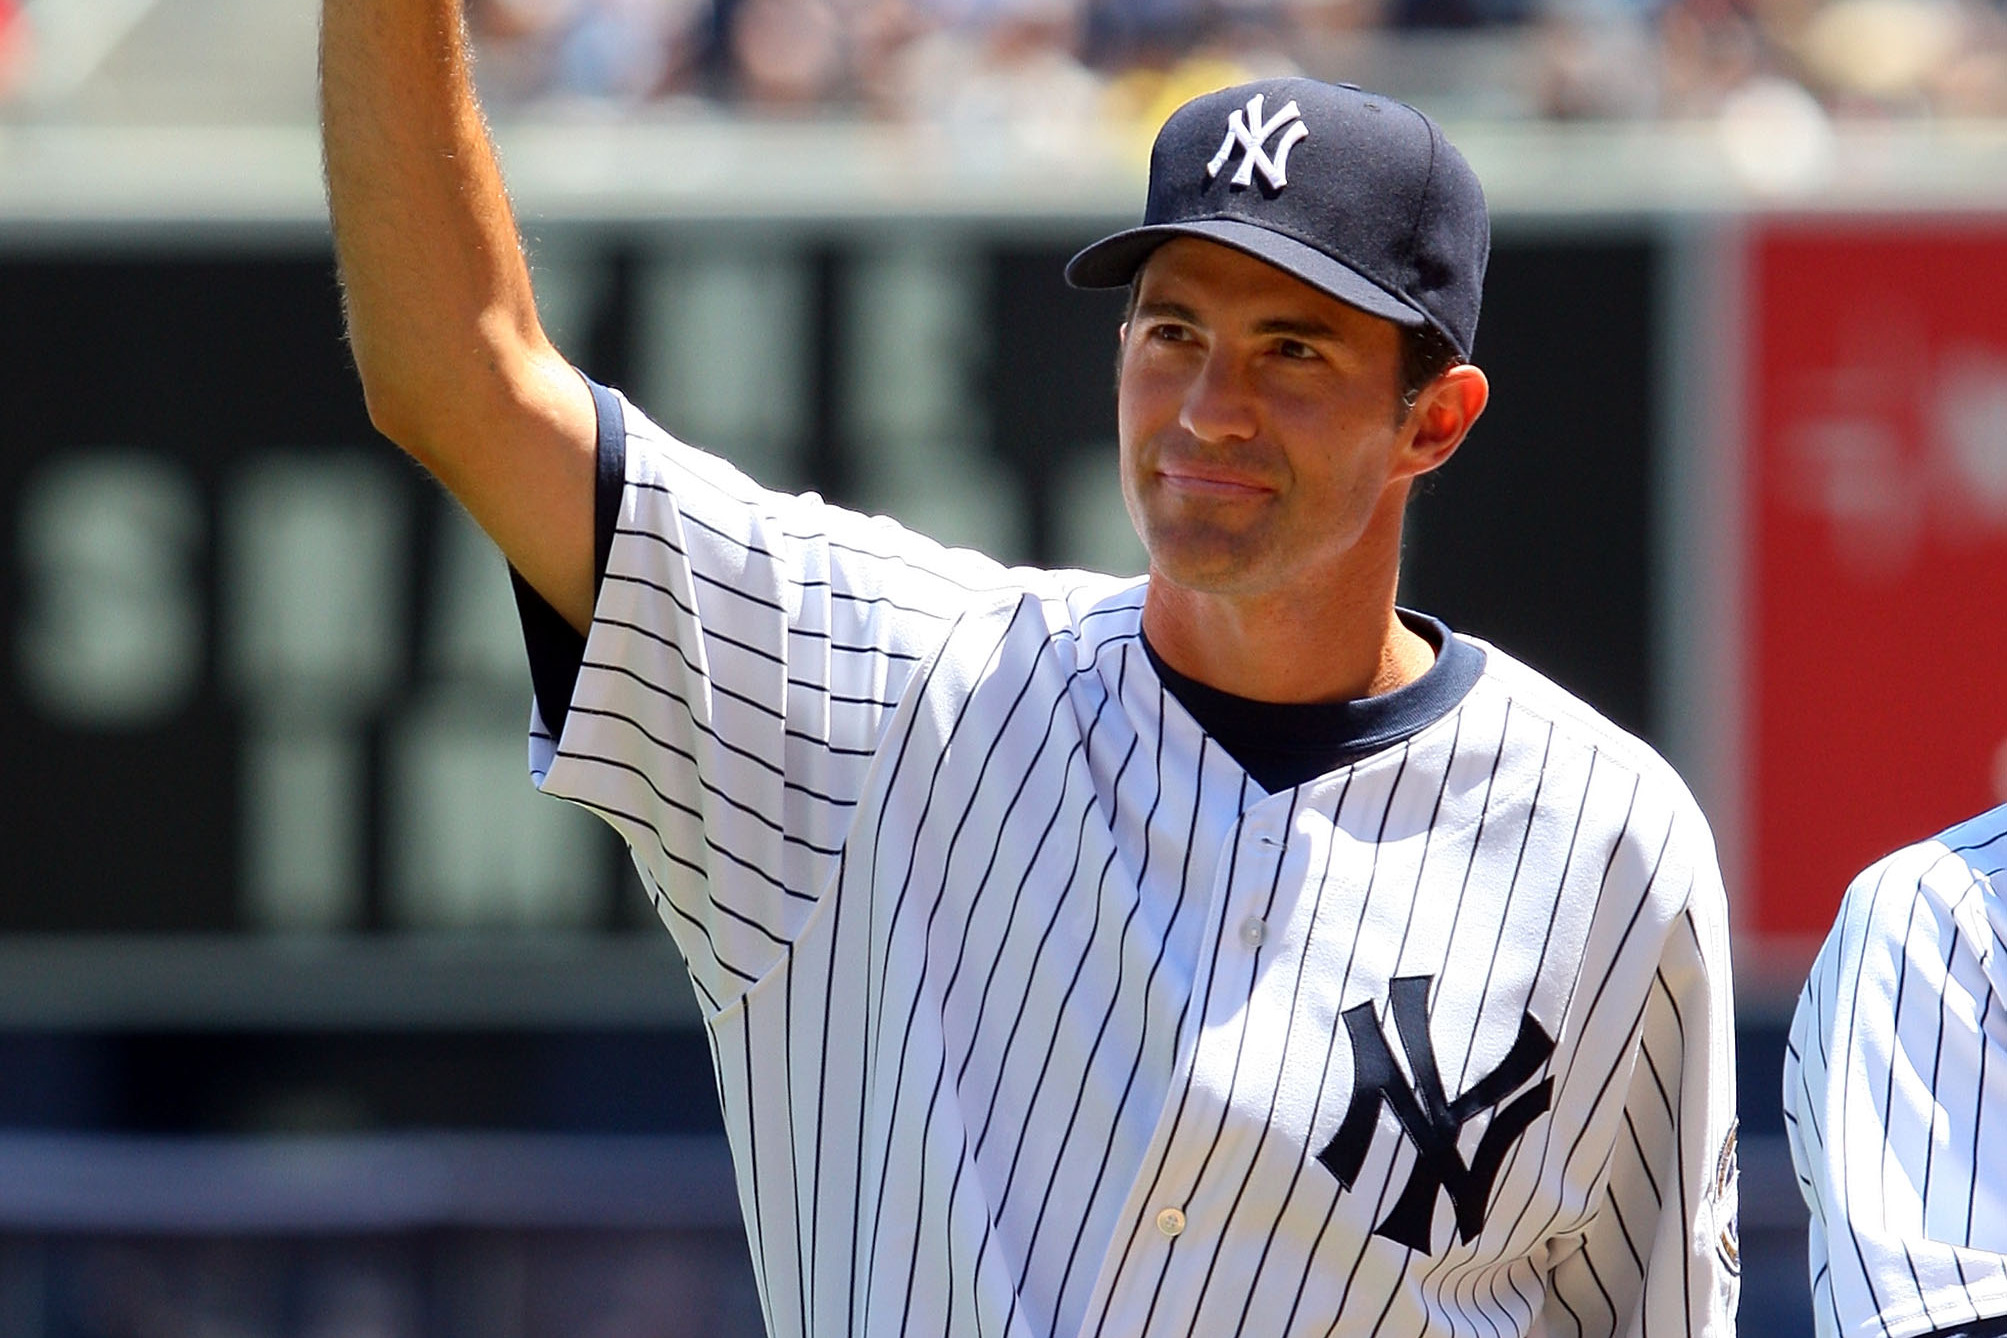 Yankees' Mussina Makes His Retirement Official - The New York